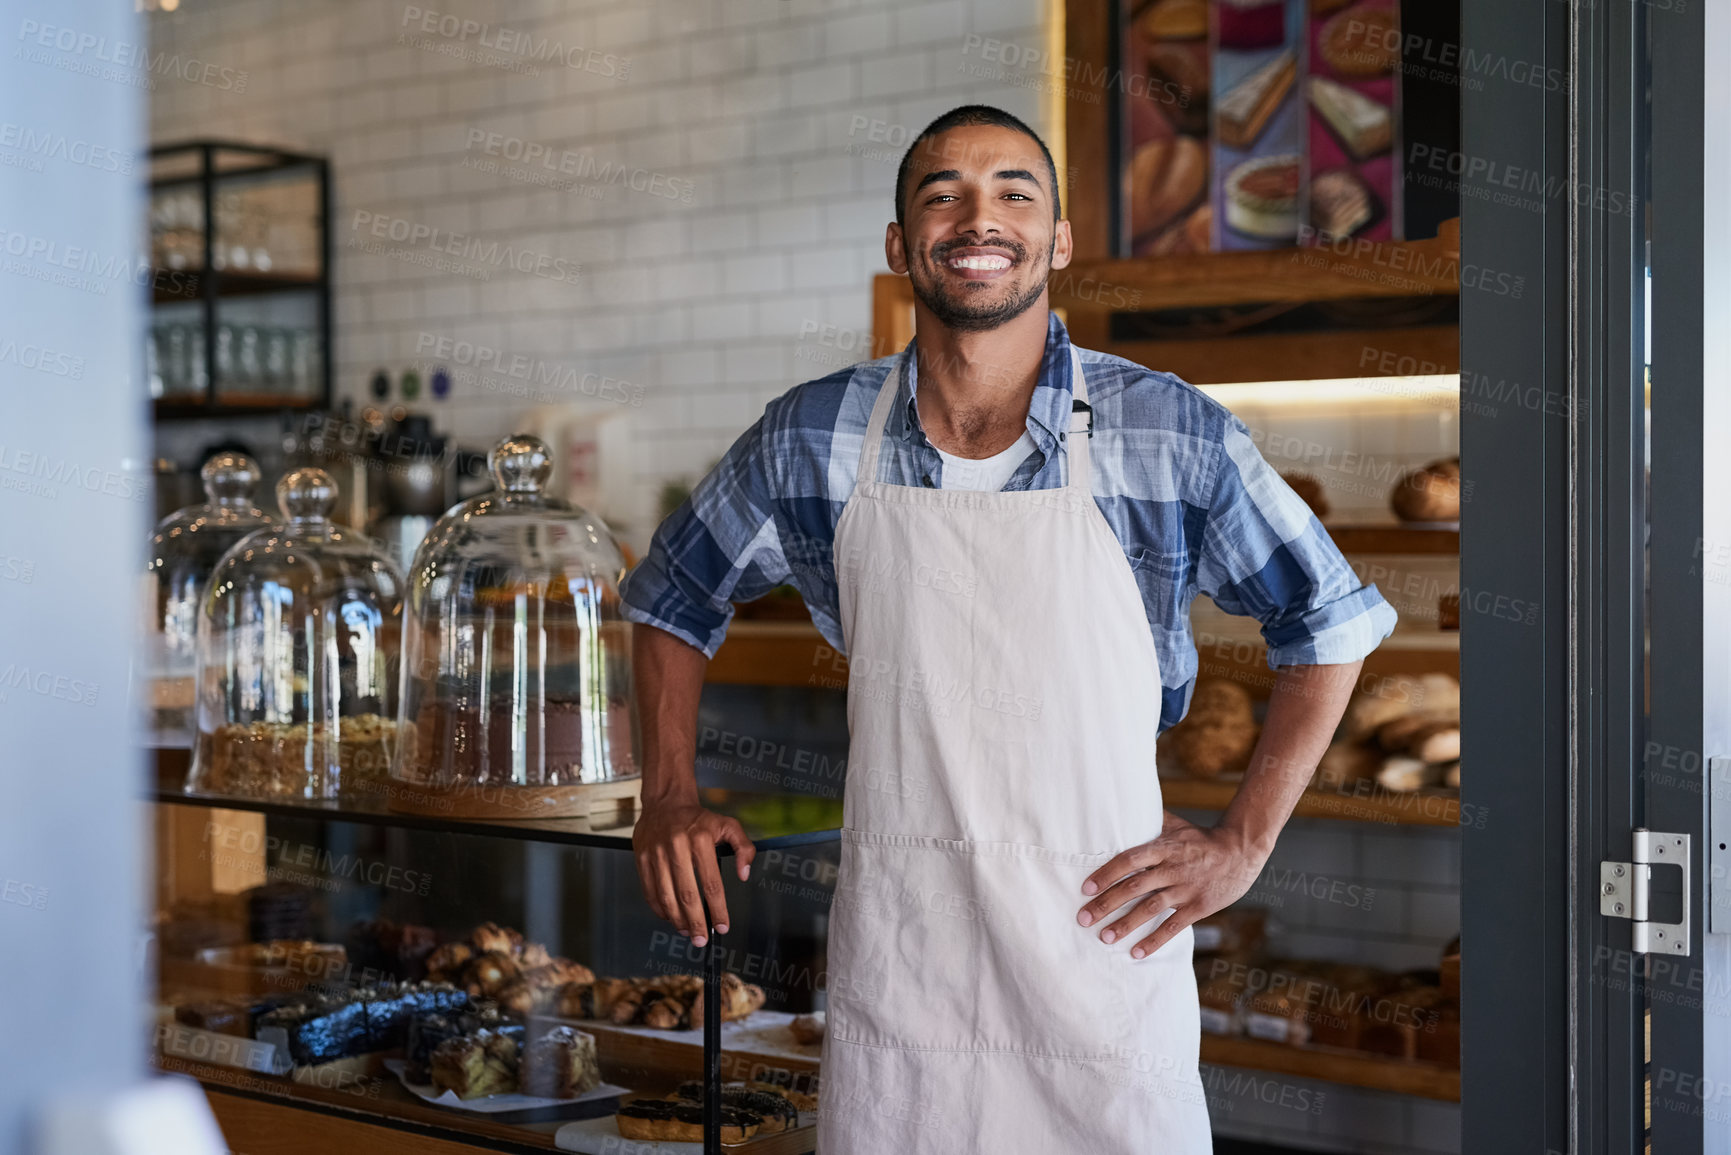 Buy stock photo Portrait of a young business owner standing in his bakery